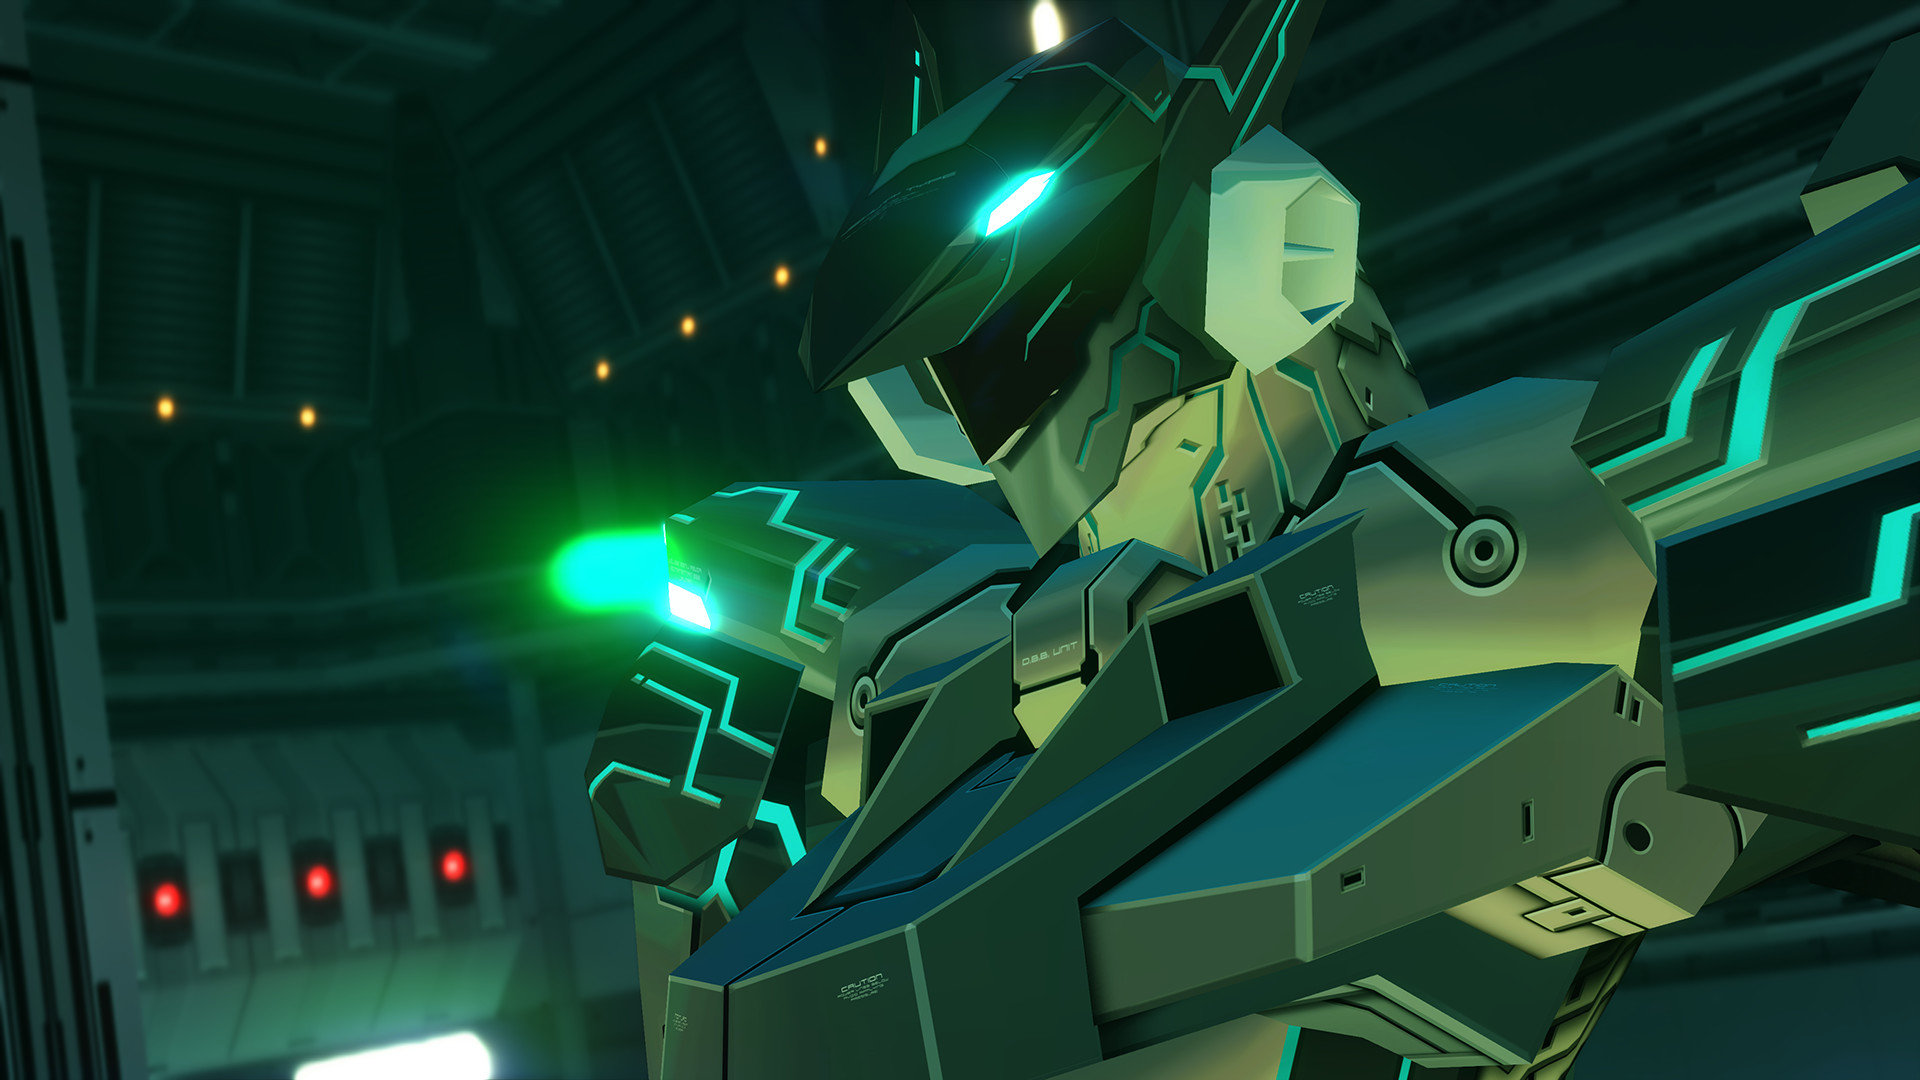 ZONE OF THE ENDERS The 2nd Runner: M∀RS